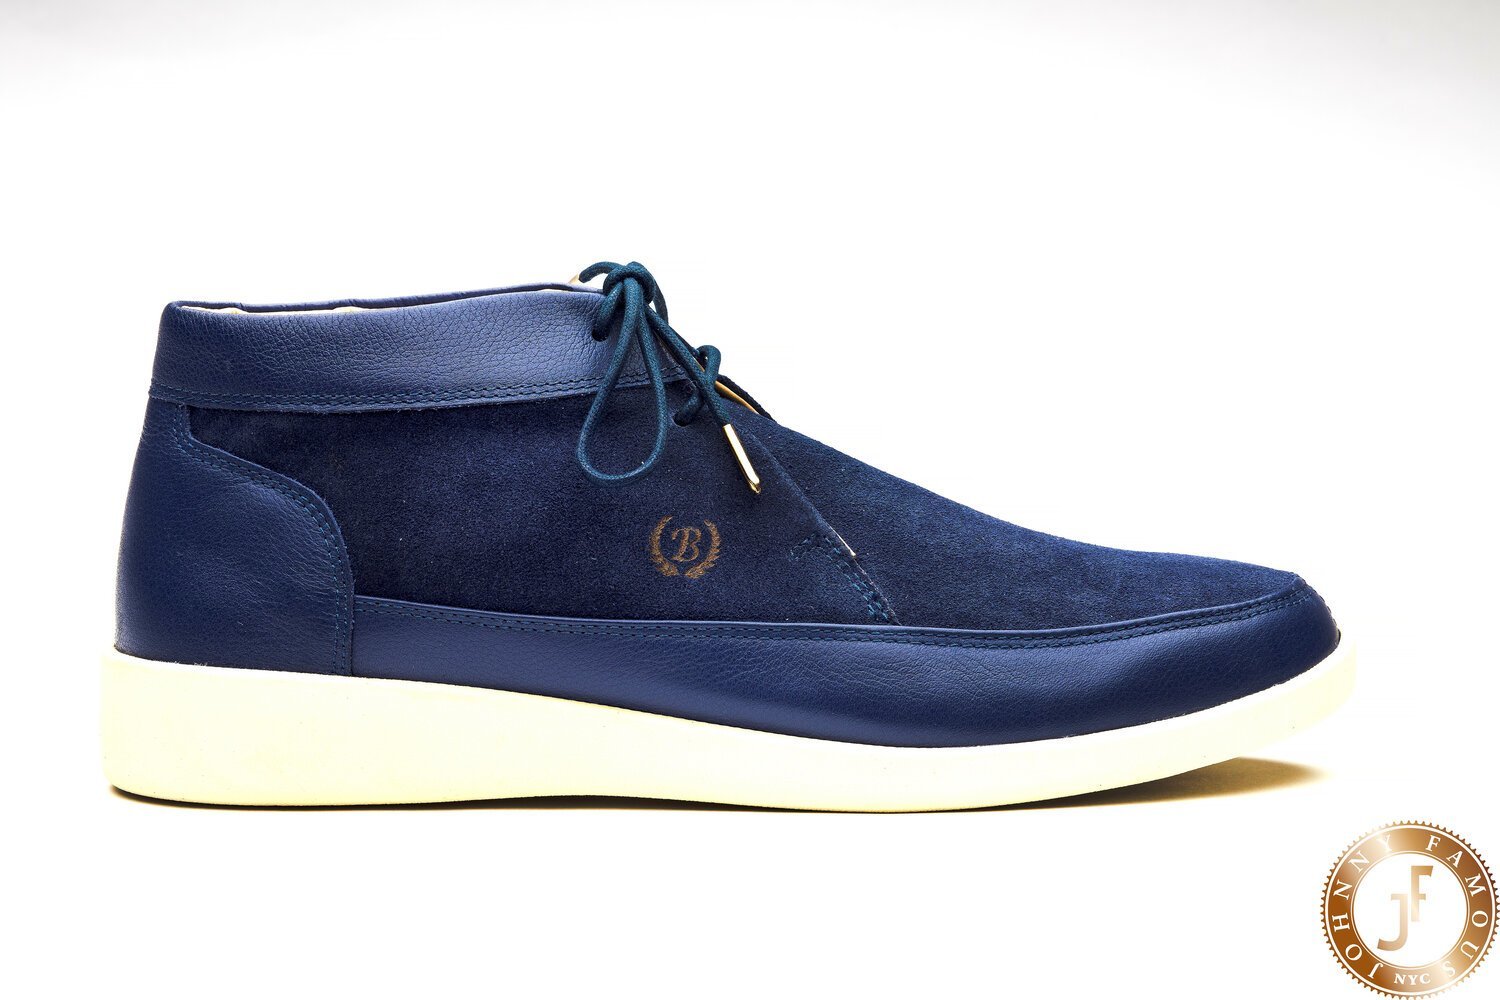 Johnny Famous Bally Style Central Park Navy Blue Suede